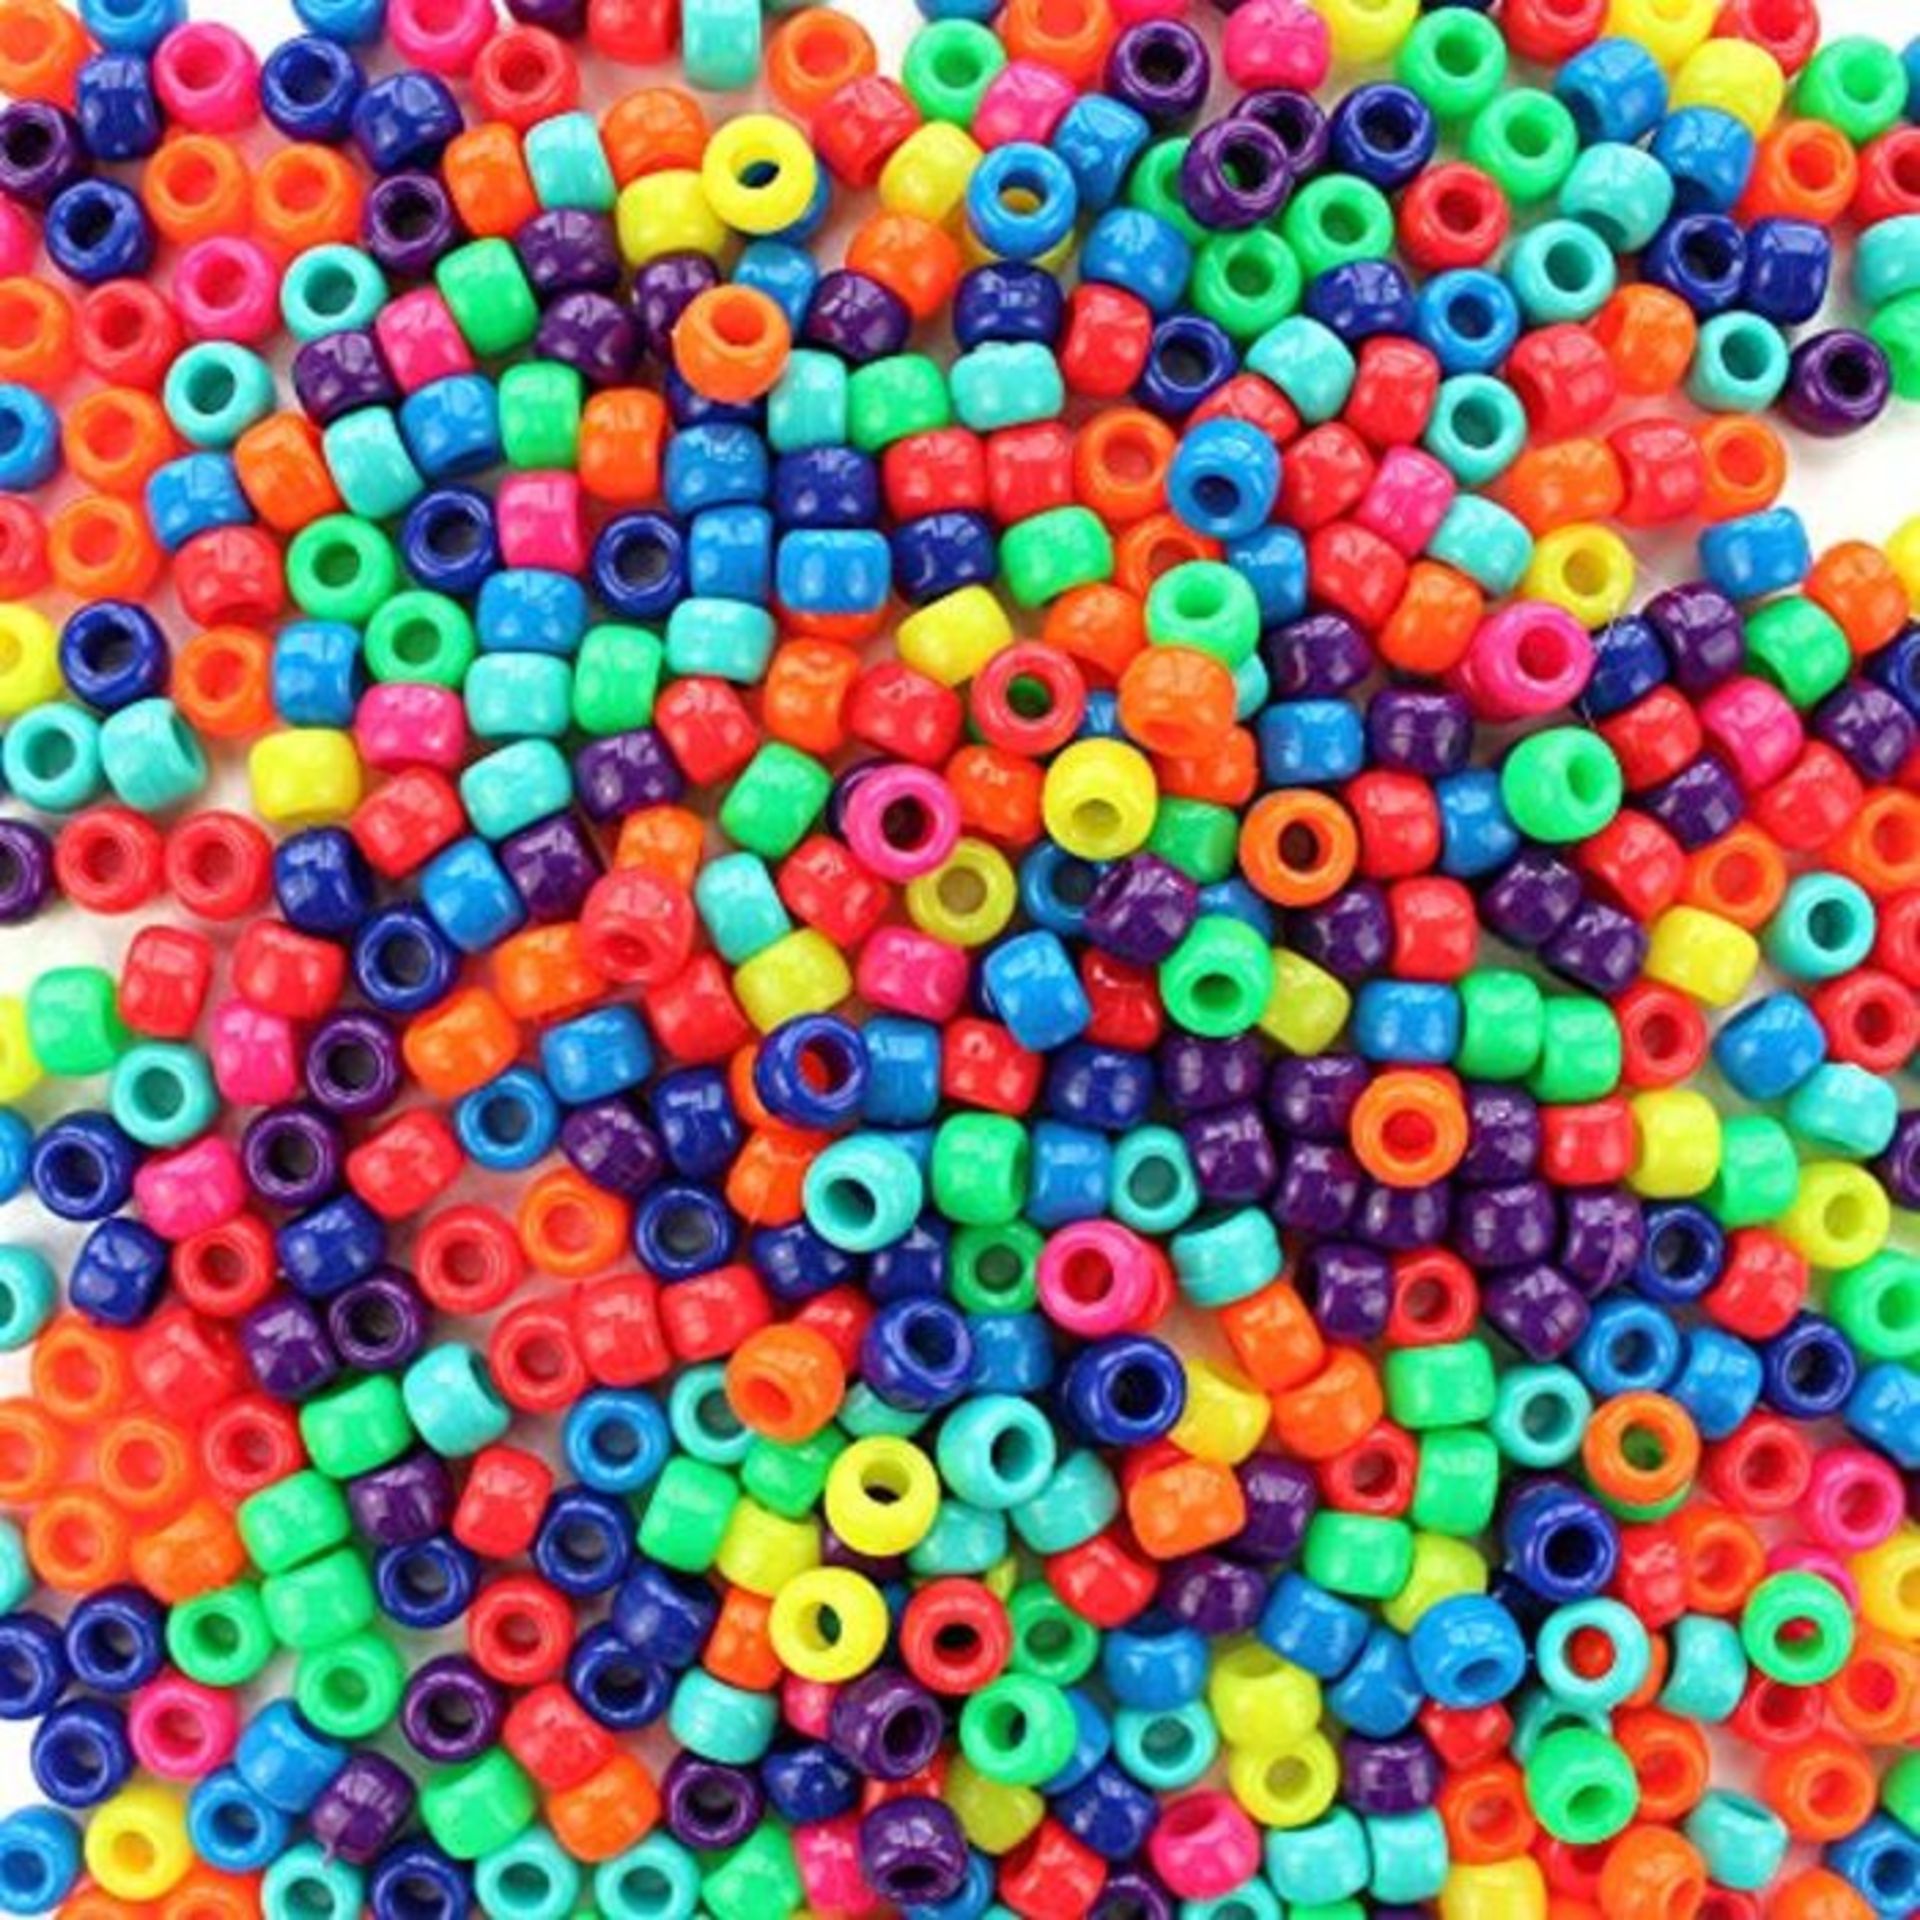 Bright Neon Rainbow Plastic Pony Beads, 6 x 9mm, Made in The USA, Multi-Color Mix 1000